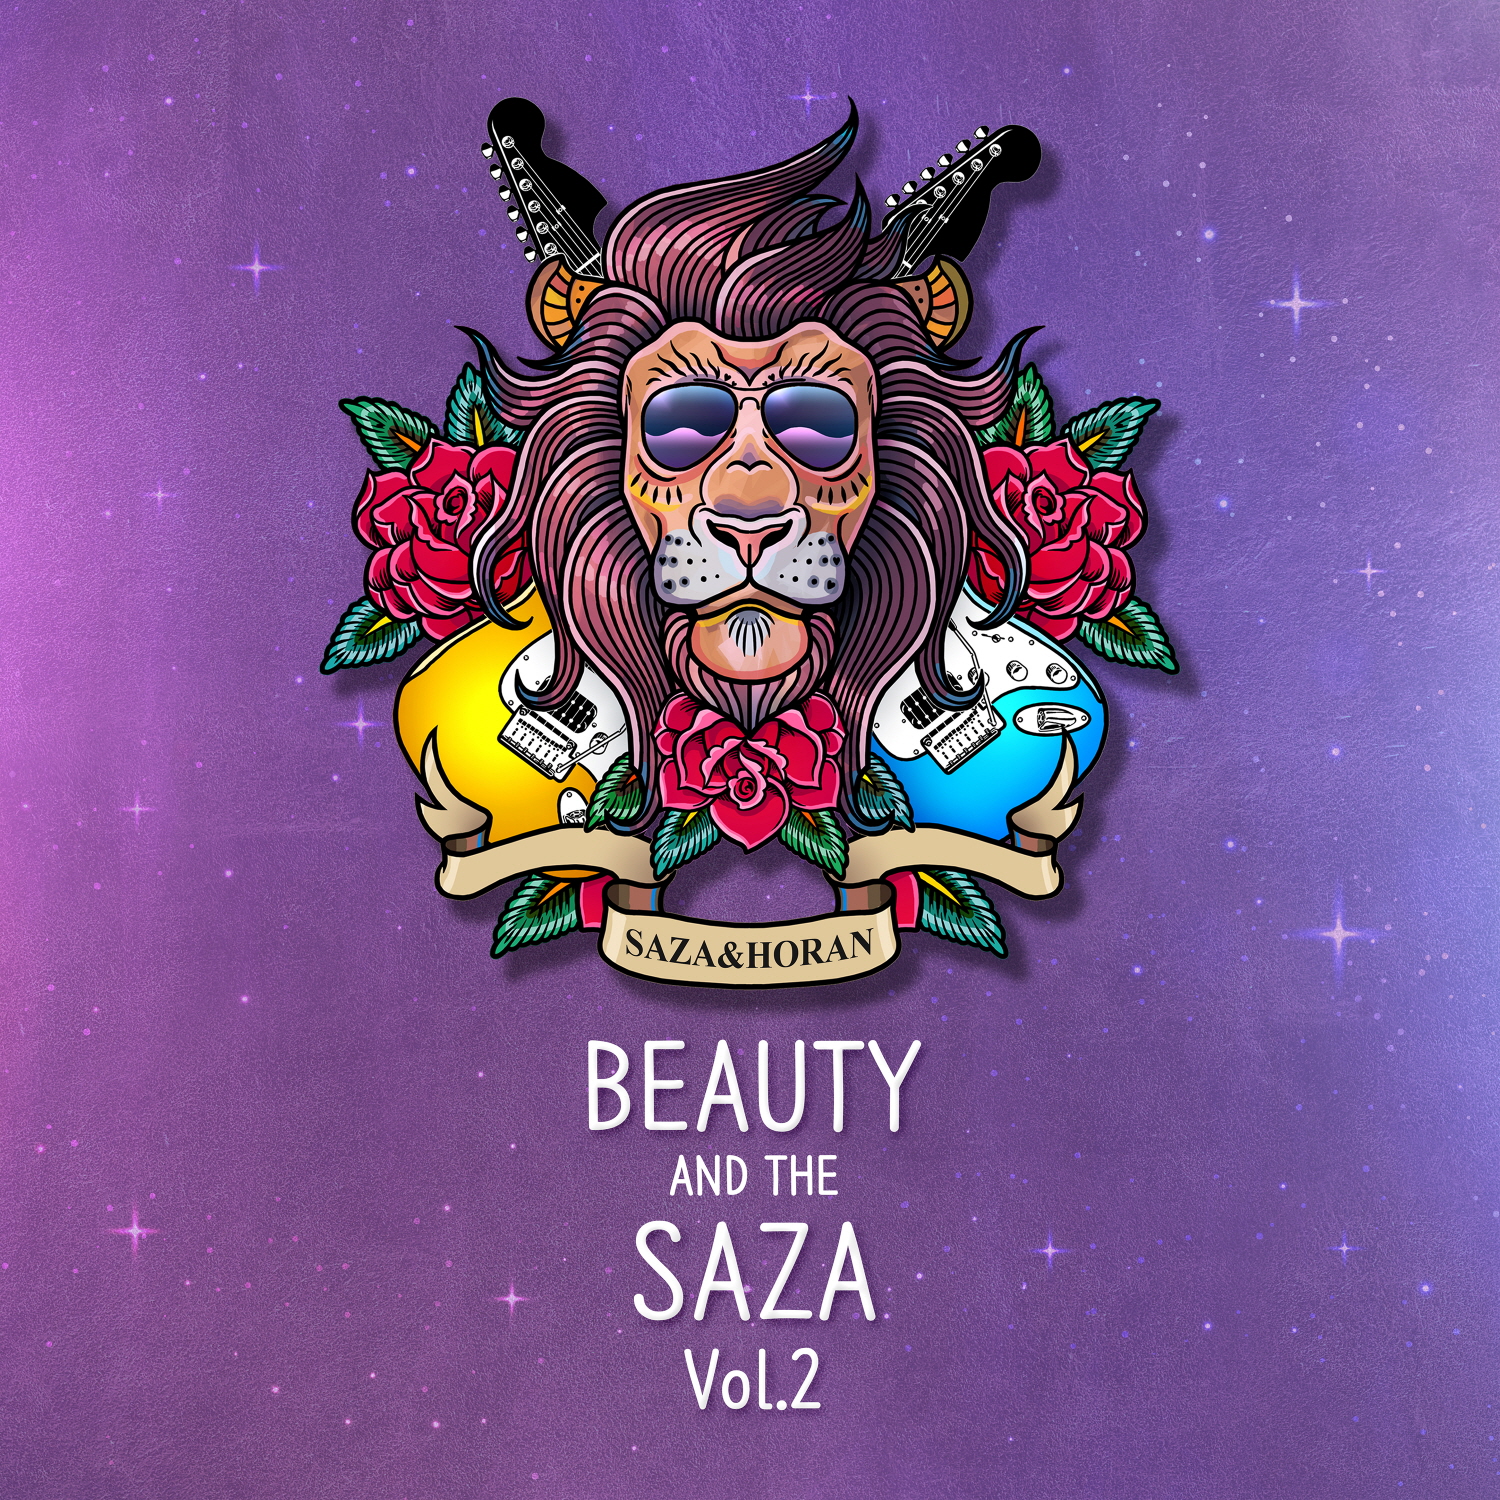 BEAUTY AND THE SAZA Vol. 2 with